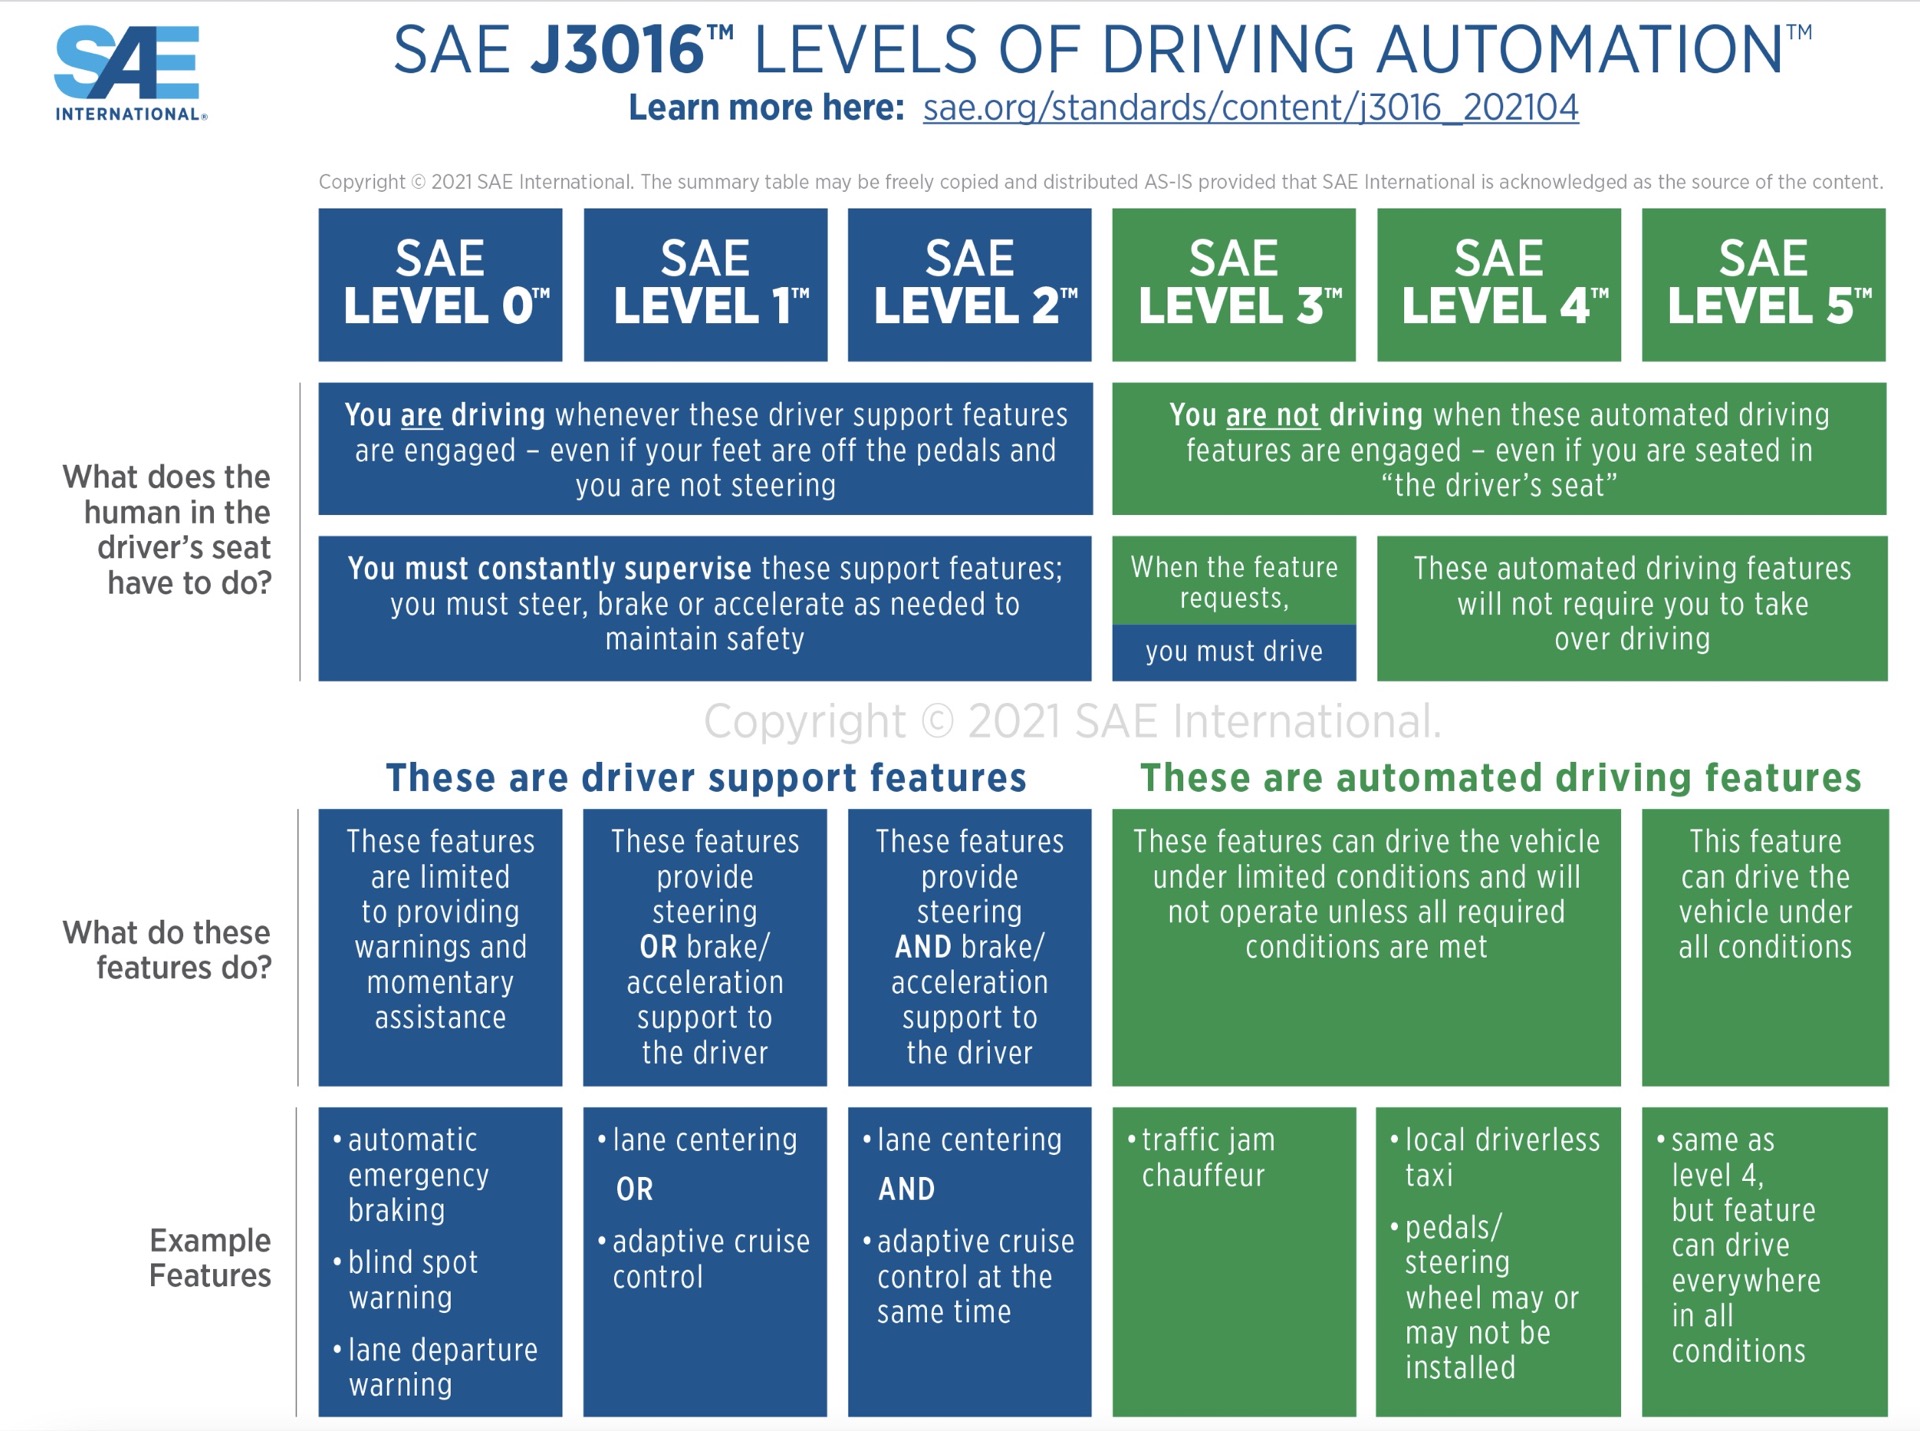 SAE levels of driving automation, from none to fully self-driving